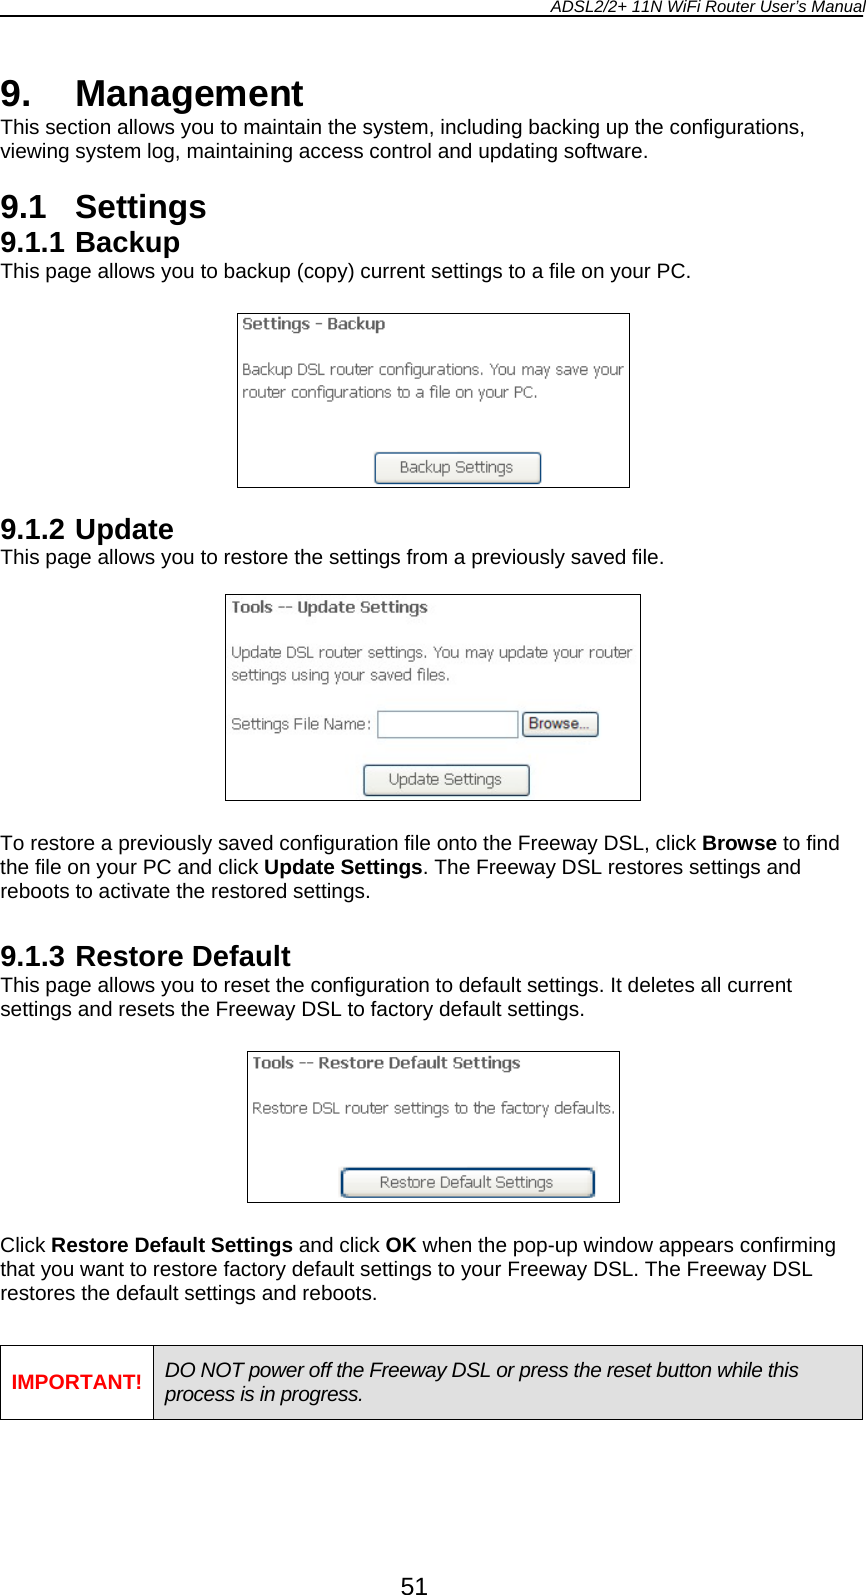 ADSL2/2+ 11N WiFi Router User’s Manual  51 9. Management This section allows you to maintain the system, including backing up the configurations, viewing system log, maintaining access control and updating software.  9.1 Settings 9.1.1 Backup This page allows you to backup (copy) current settings to a file on your PC.    9.1.2 Update This page allows you to restore the settings from a previously saved file.    To restore a previously saved configuration file onto the Freeway DSL, click Browse to find the file on your PC and click Update Settings. The Freeway DSL restores settings and reboots to activate the restored settings.  9.1.3 Restore Default This page allows you to reset the configuration to default settings. It deletes all current settings and resets the Freeway DSL to factory default settings.    Click Restore Default Settings and click OK when the pop-up window appears confirming that you want to restore factory default settings to your Freeway DSL. The Freeway DSL restores the default settings and reboots.  IMPORTANT! DO NOT power off the Freeway DSL or press the reset button while this process is in progress.  